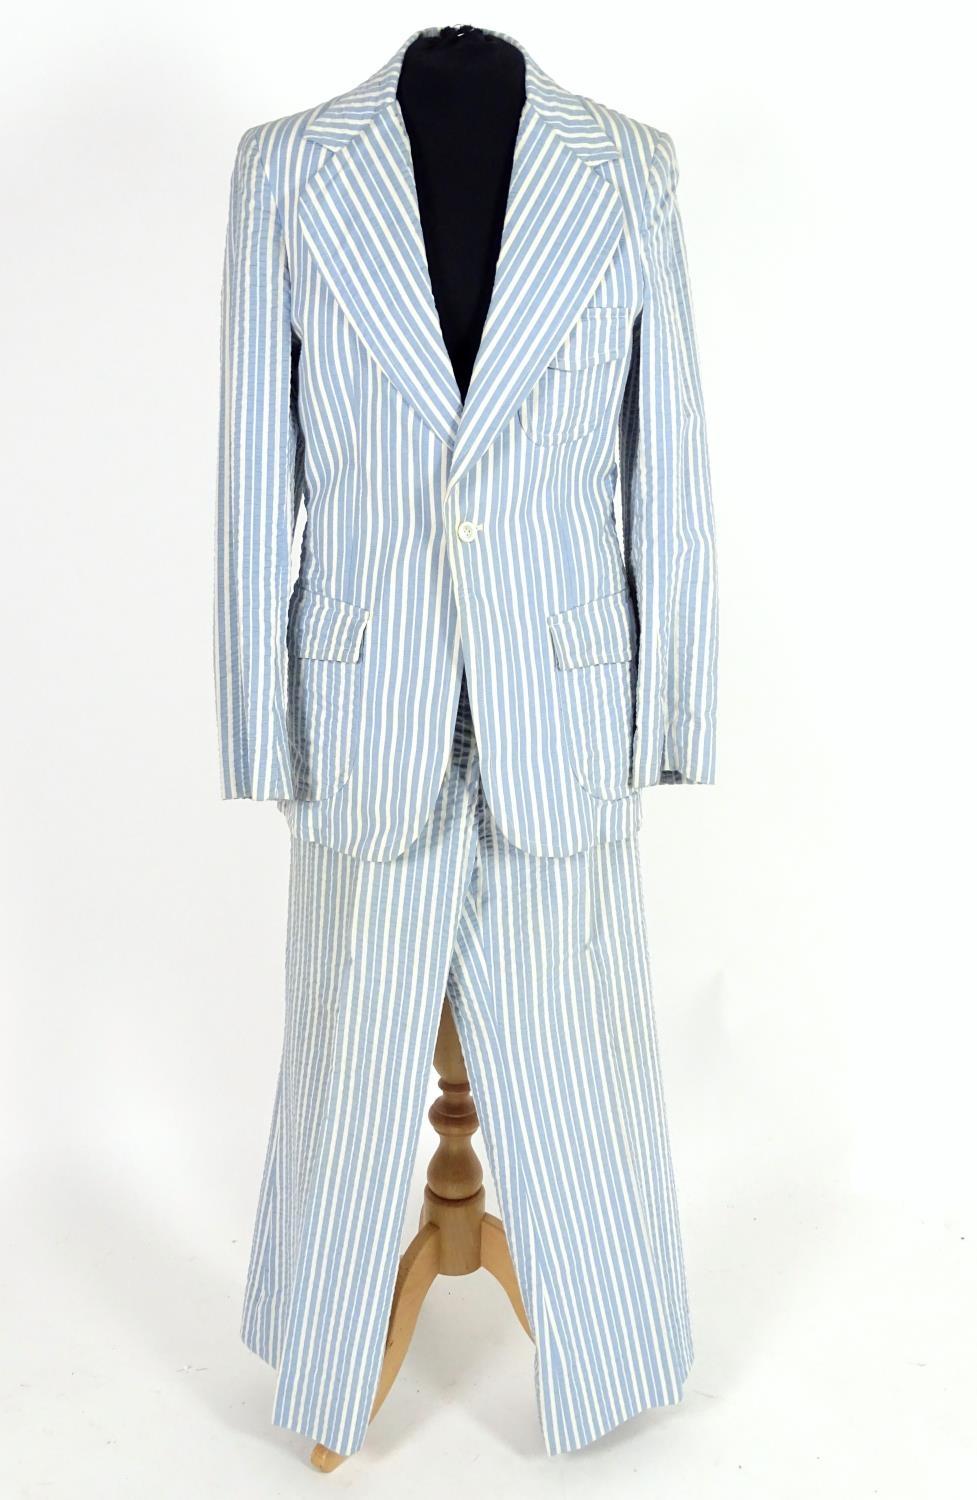 2 vintage stripy suits by Austins, a light brown and cream striped jacket and trousers along with - Image 9 of 10